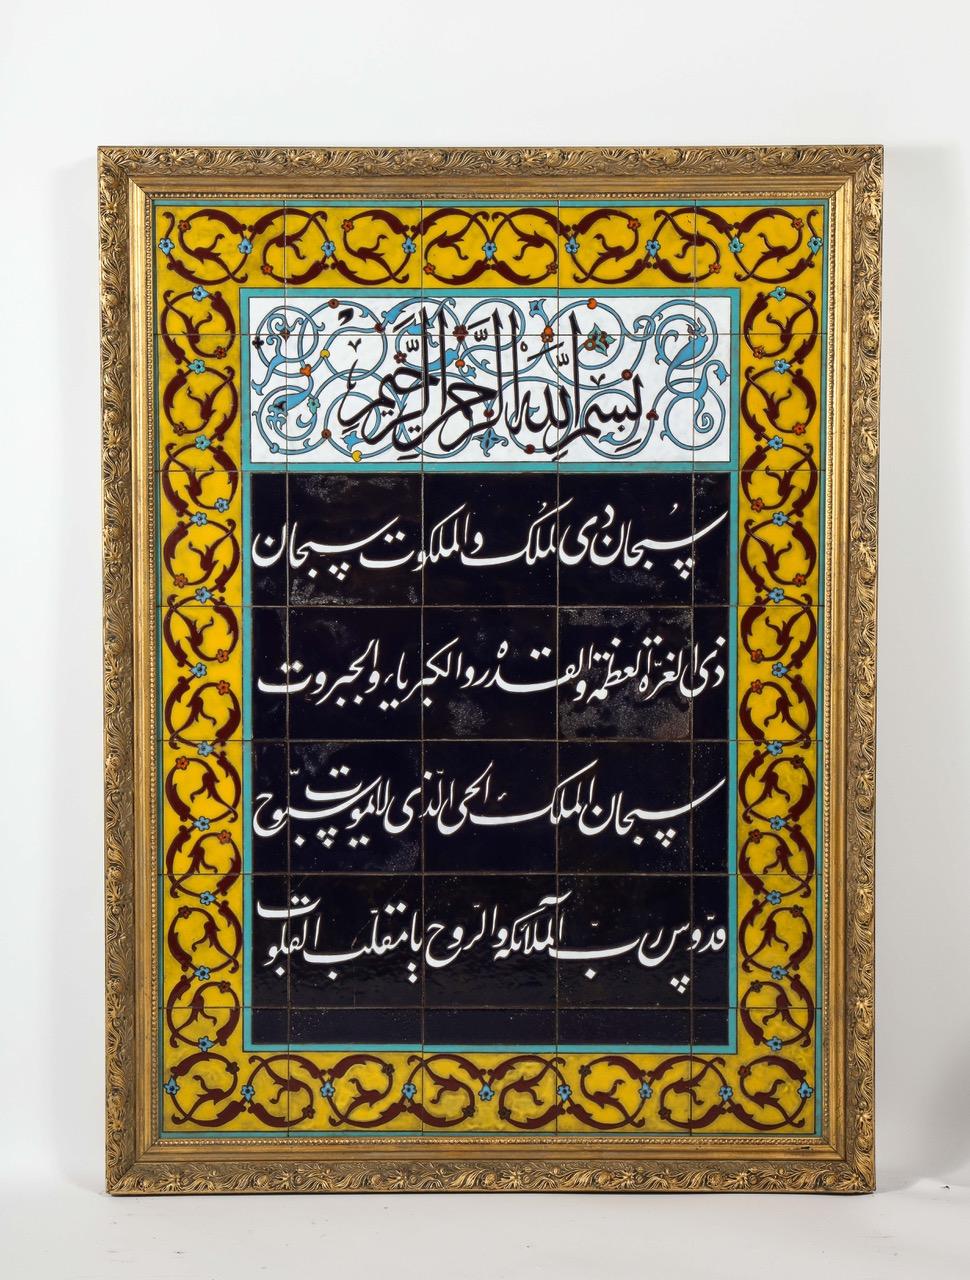 Exceptional Pair of Islamic Middle Eastern Ceramic Tiles with Quran Verses 8